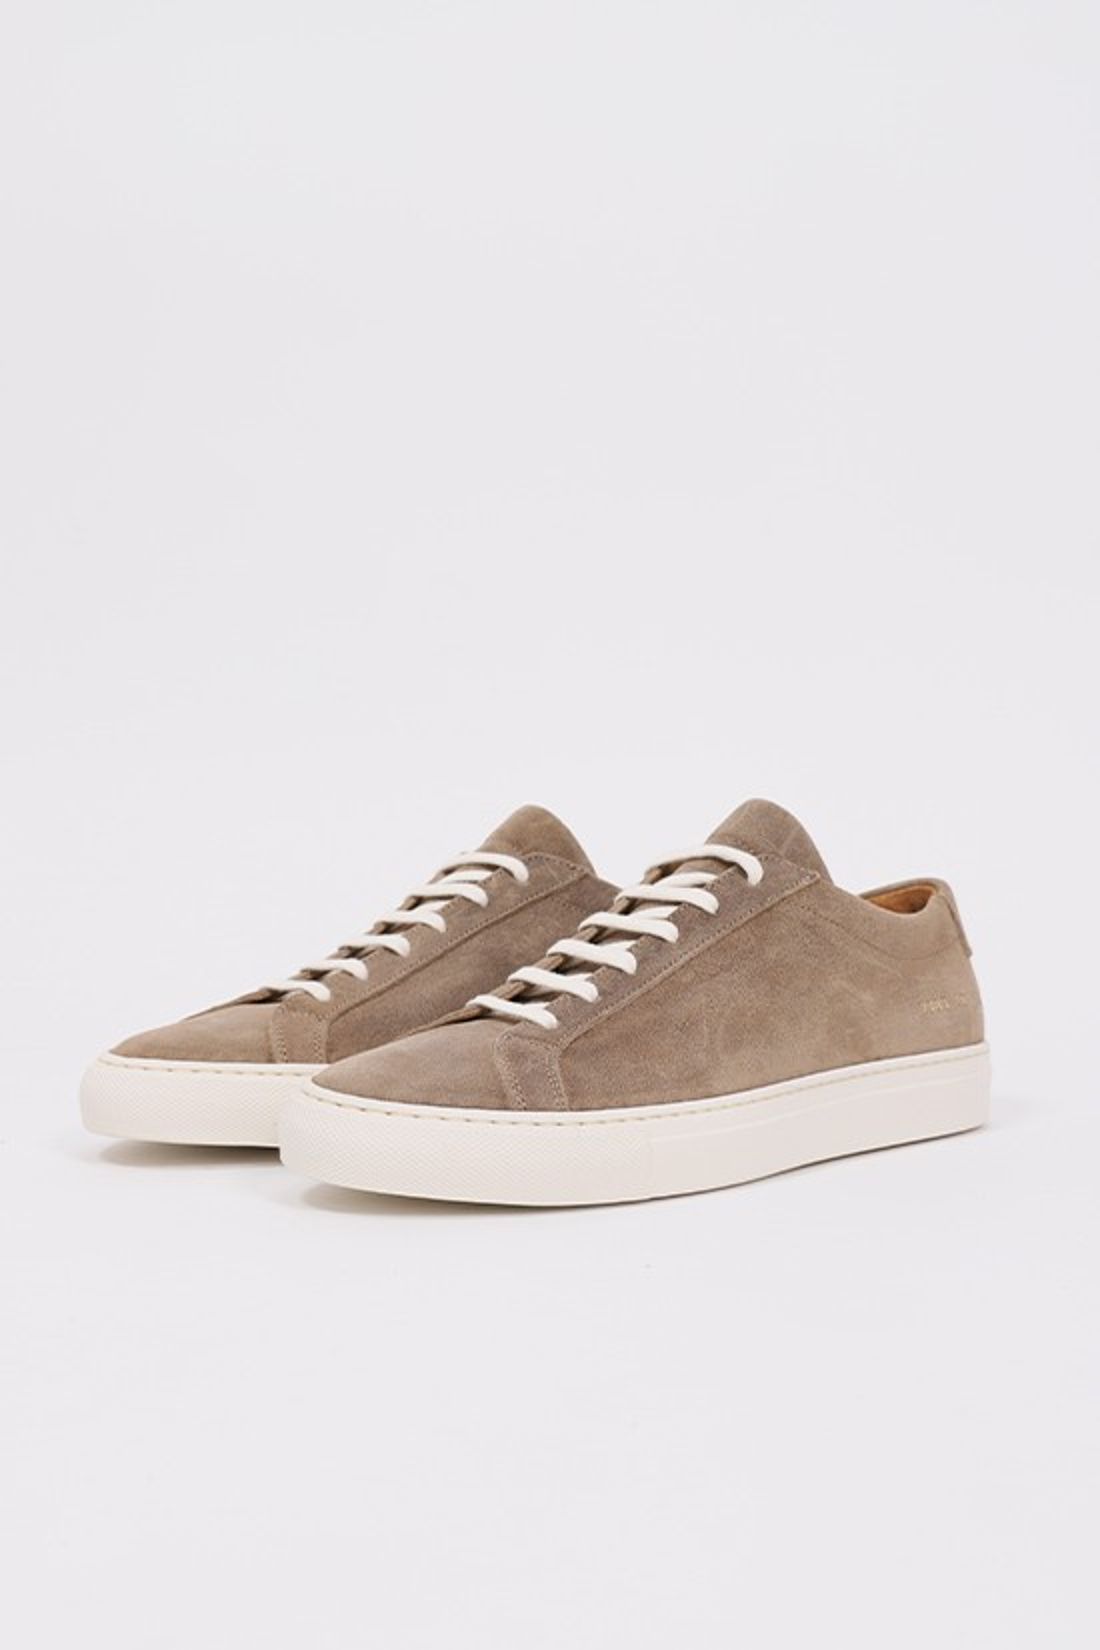 COMMON PROJECTS / Achilles low waxed suede 2309 Tan 1302